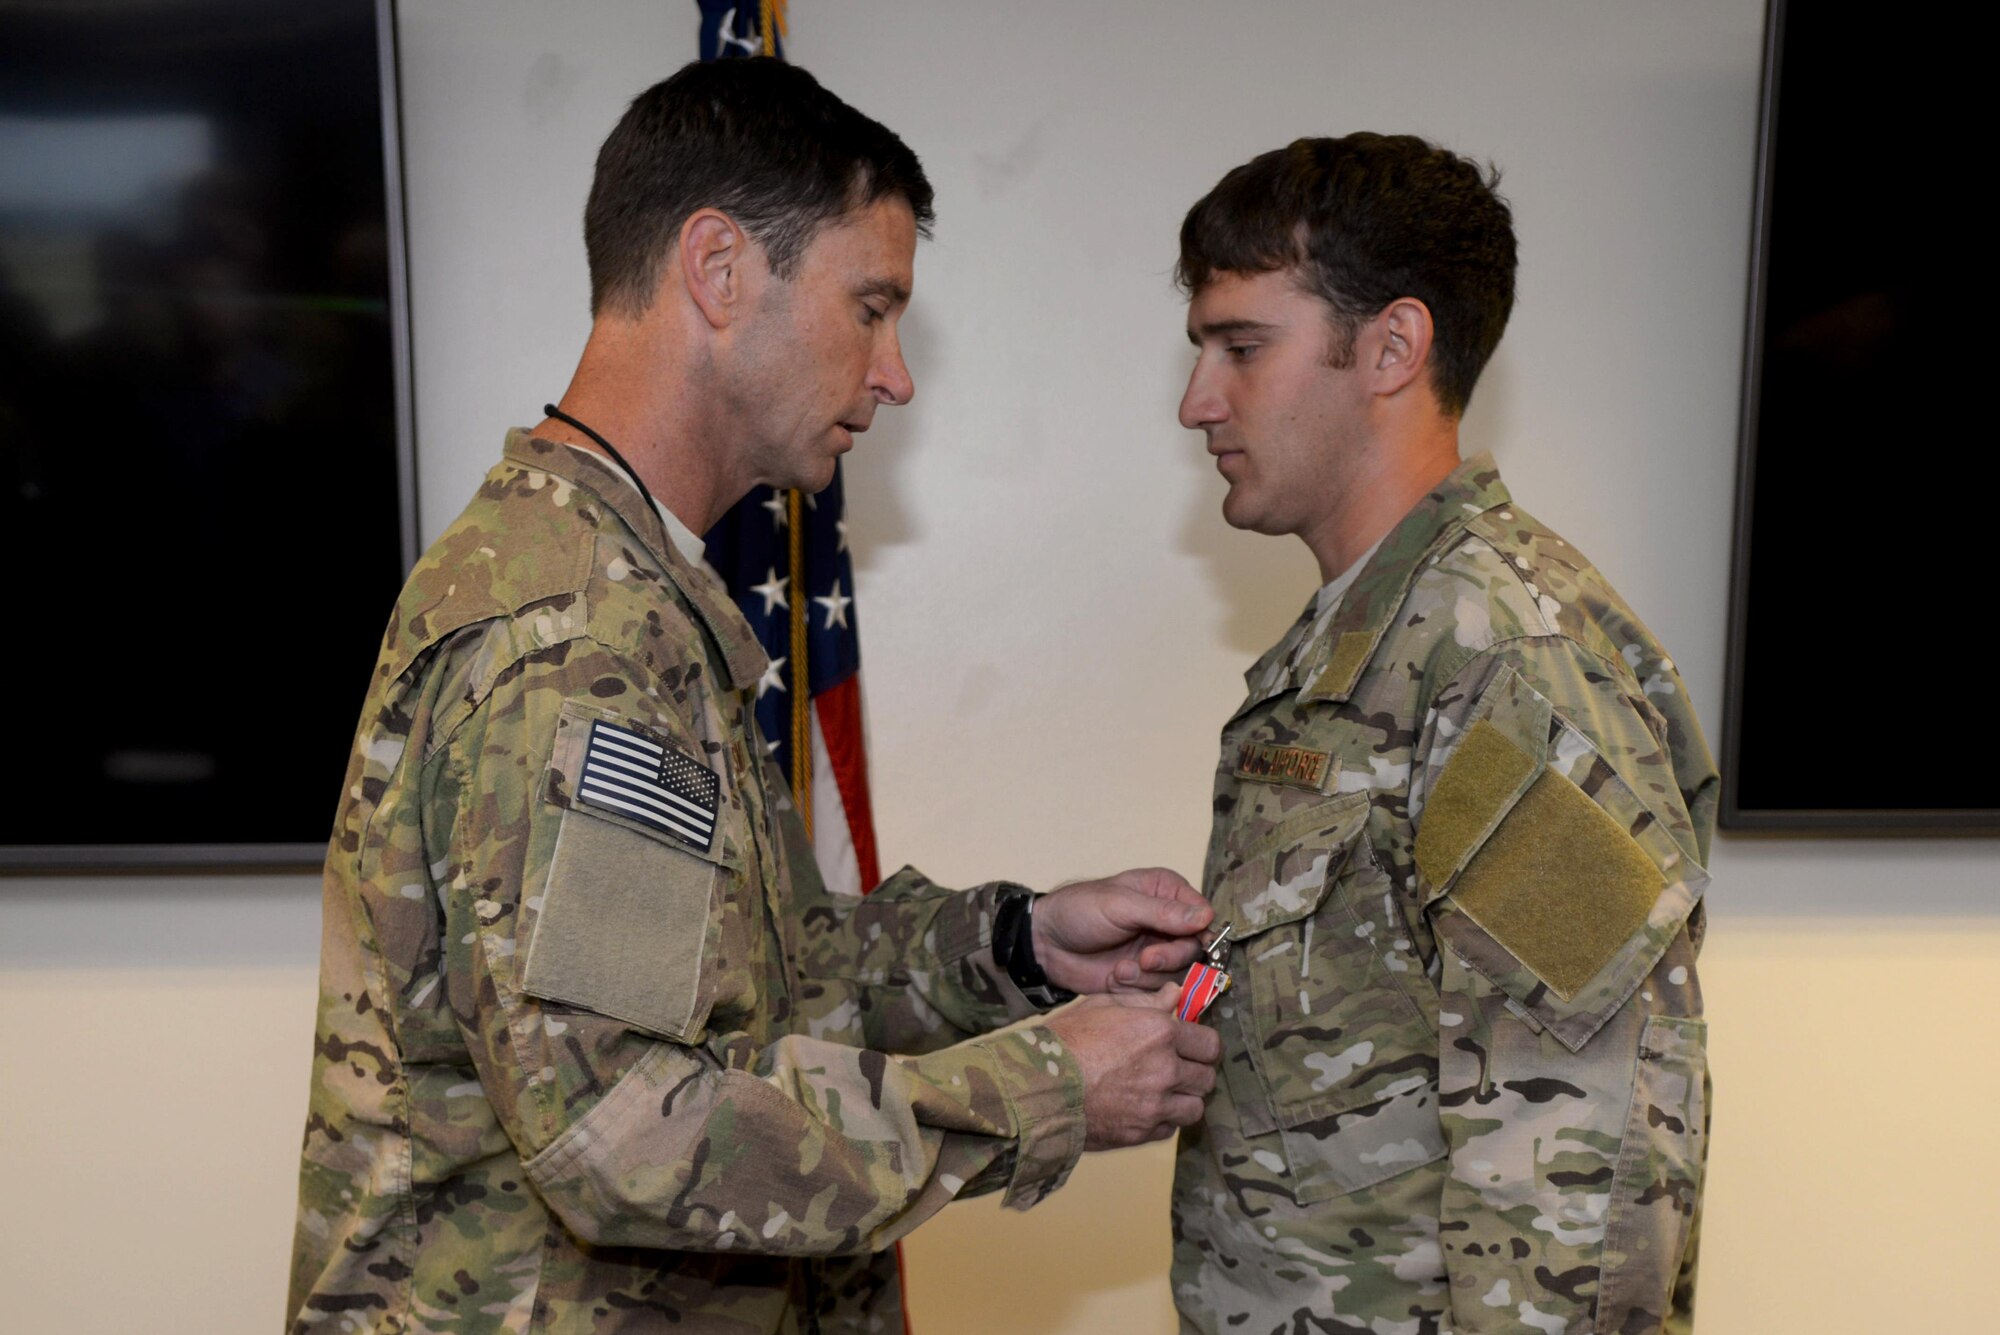 U.S. Air Force Col. Matthew Smith, left, 352d Special Operations Wing commander, pins the Bronze Star Medal on U.S. Air Force Staff Sgt. Joshua Kirby, right, 321st Special Tactic Squadron, June 27, 2017, on RAF Mildenhall, England. While deployed, Kirby exhibited meritorious service during combat operations, thus earning the Bronze Star Medal. (U.S. Air Force photo by Airman 1st Class Tenley Long)